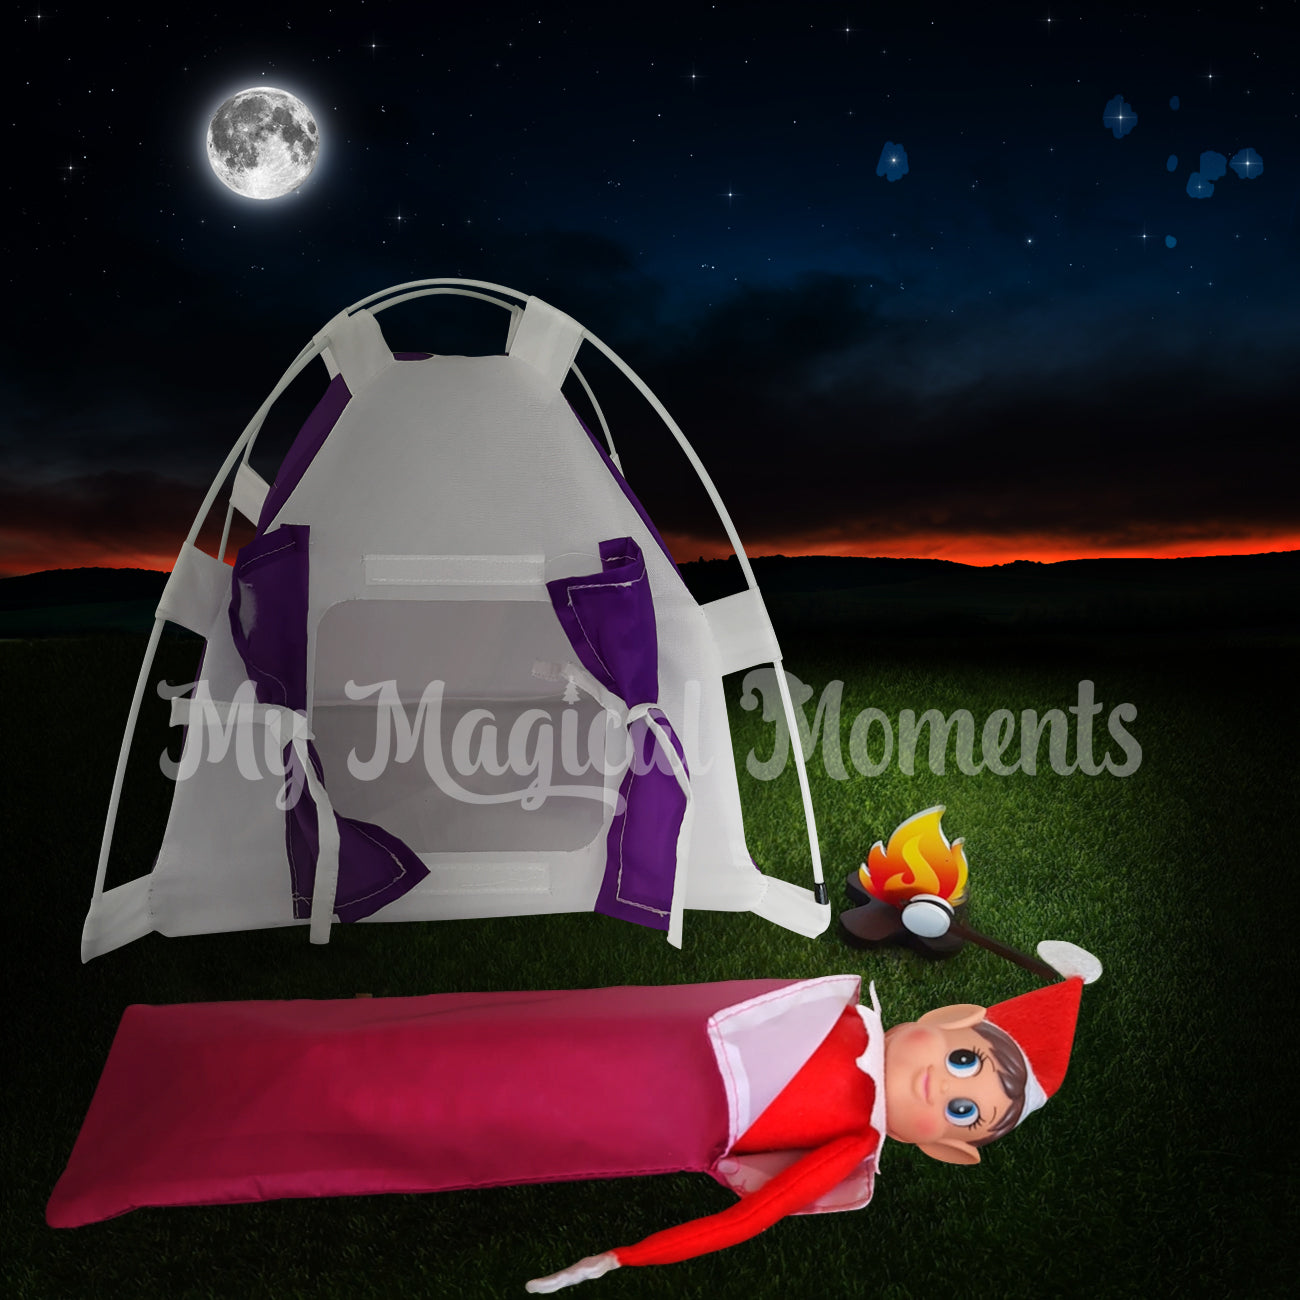 Elves Behavin badly in Sleeping bag purple in colour with a purple tent